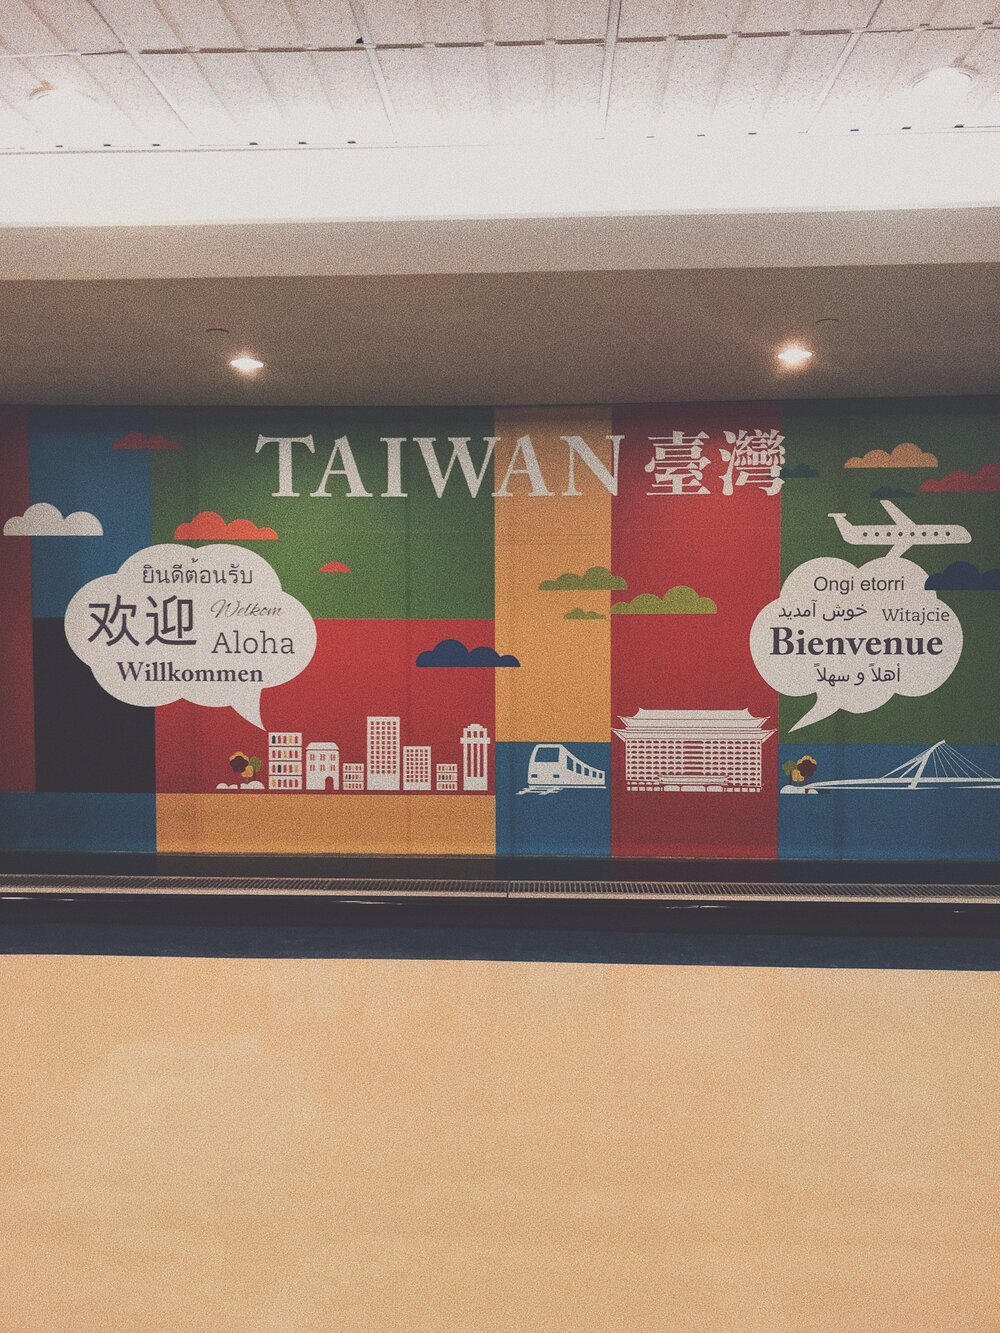 Arrival at Taipei Airport